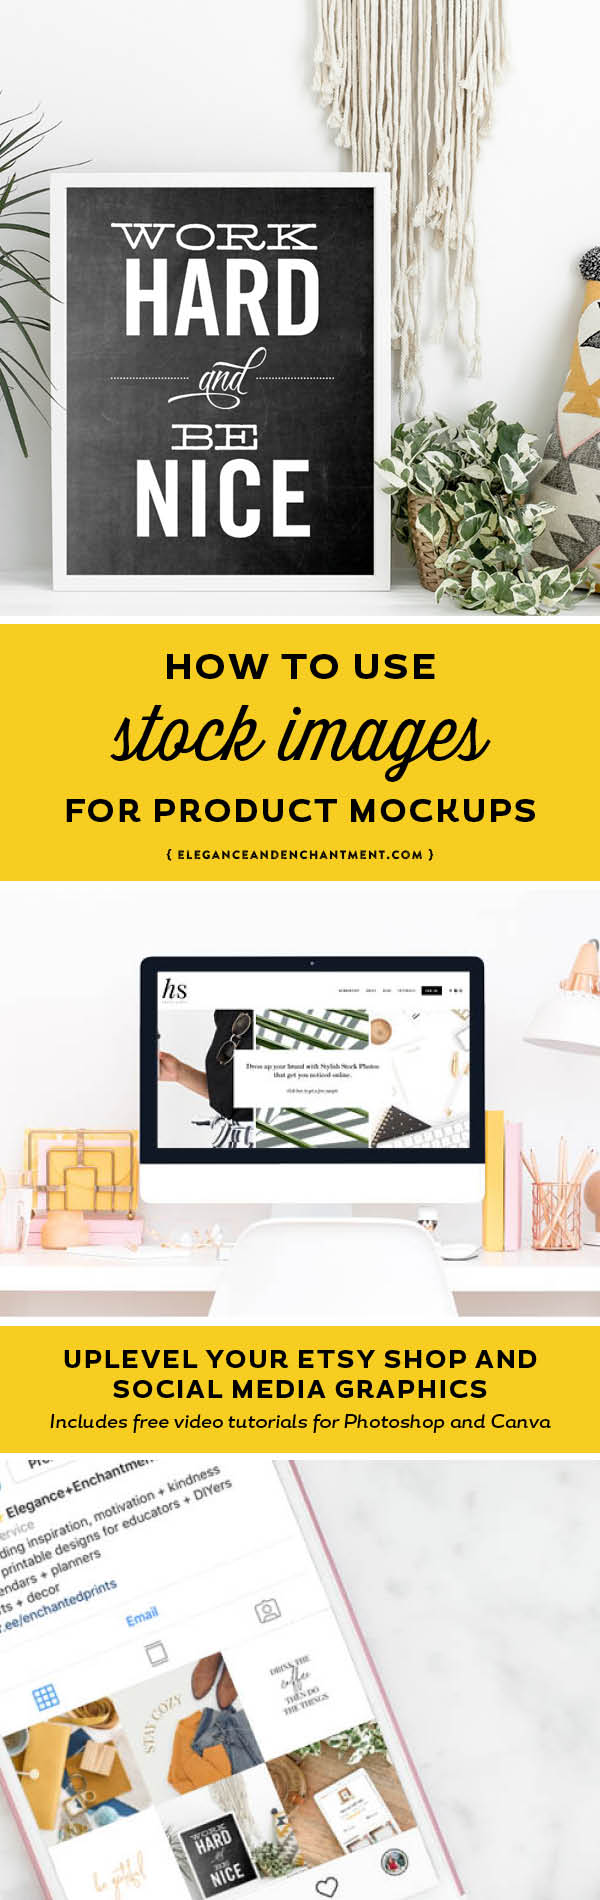 Wondering where those Etsy shops got those fabulous looking product images? In this article, you’ll learn where to find stock images for product mockups, how to overlay your artwork on stock images, and how to market your products with additional imagery. // Includes video tutorials for working in Canva and Photoshop. // From Elegance and Enchantment